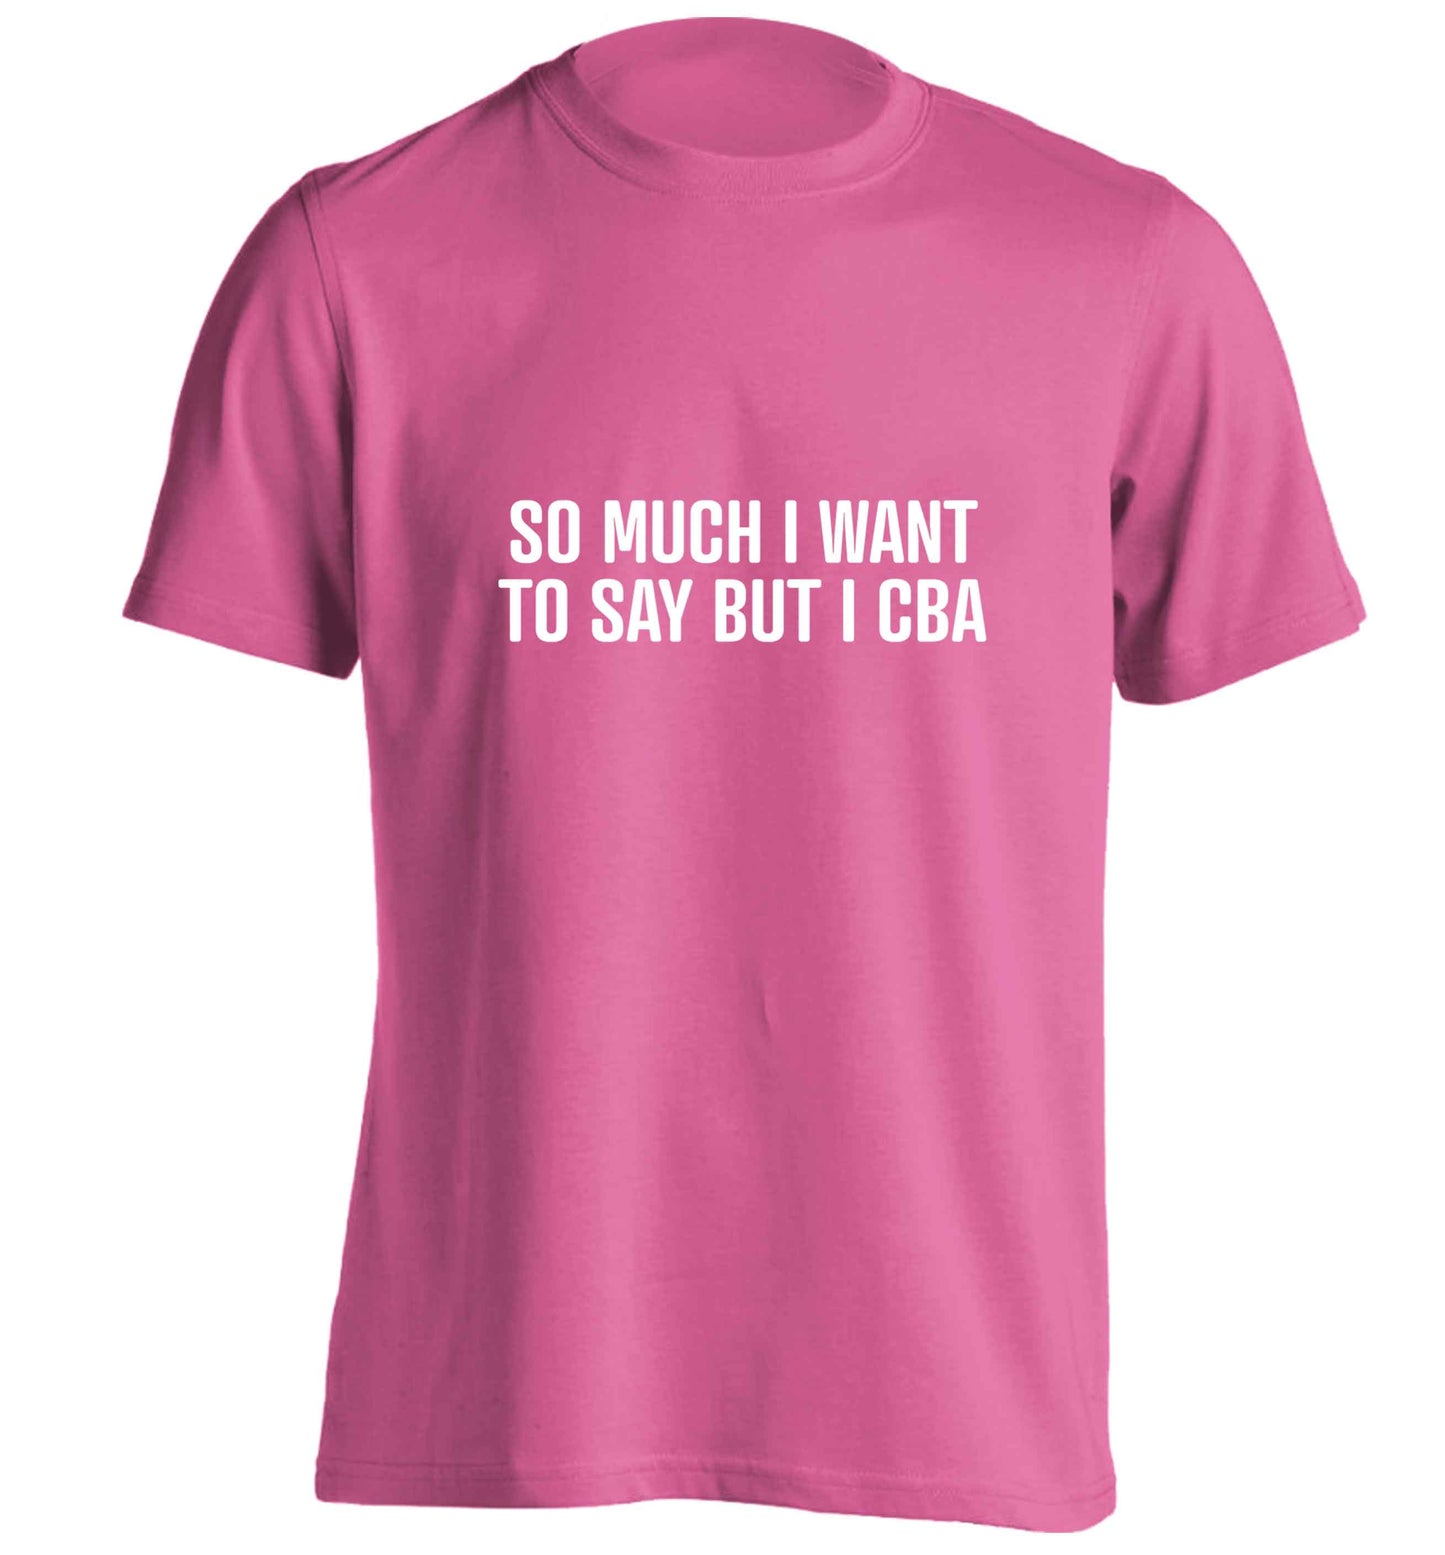 So much I want to say I cba  adults unisex pink Tshirt 2XL